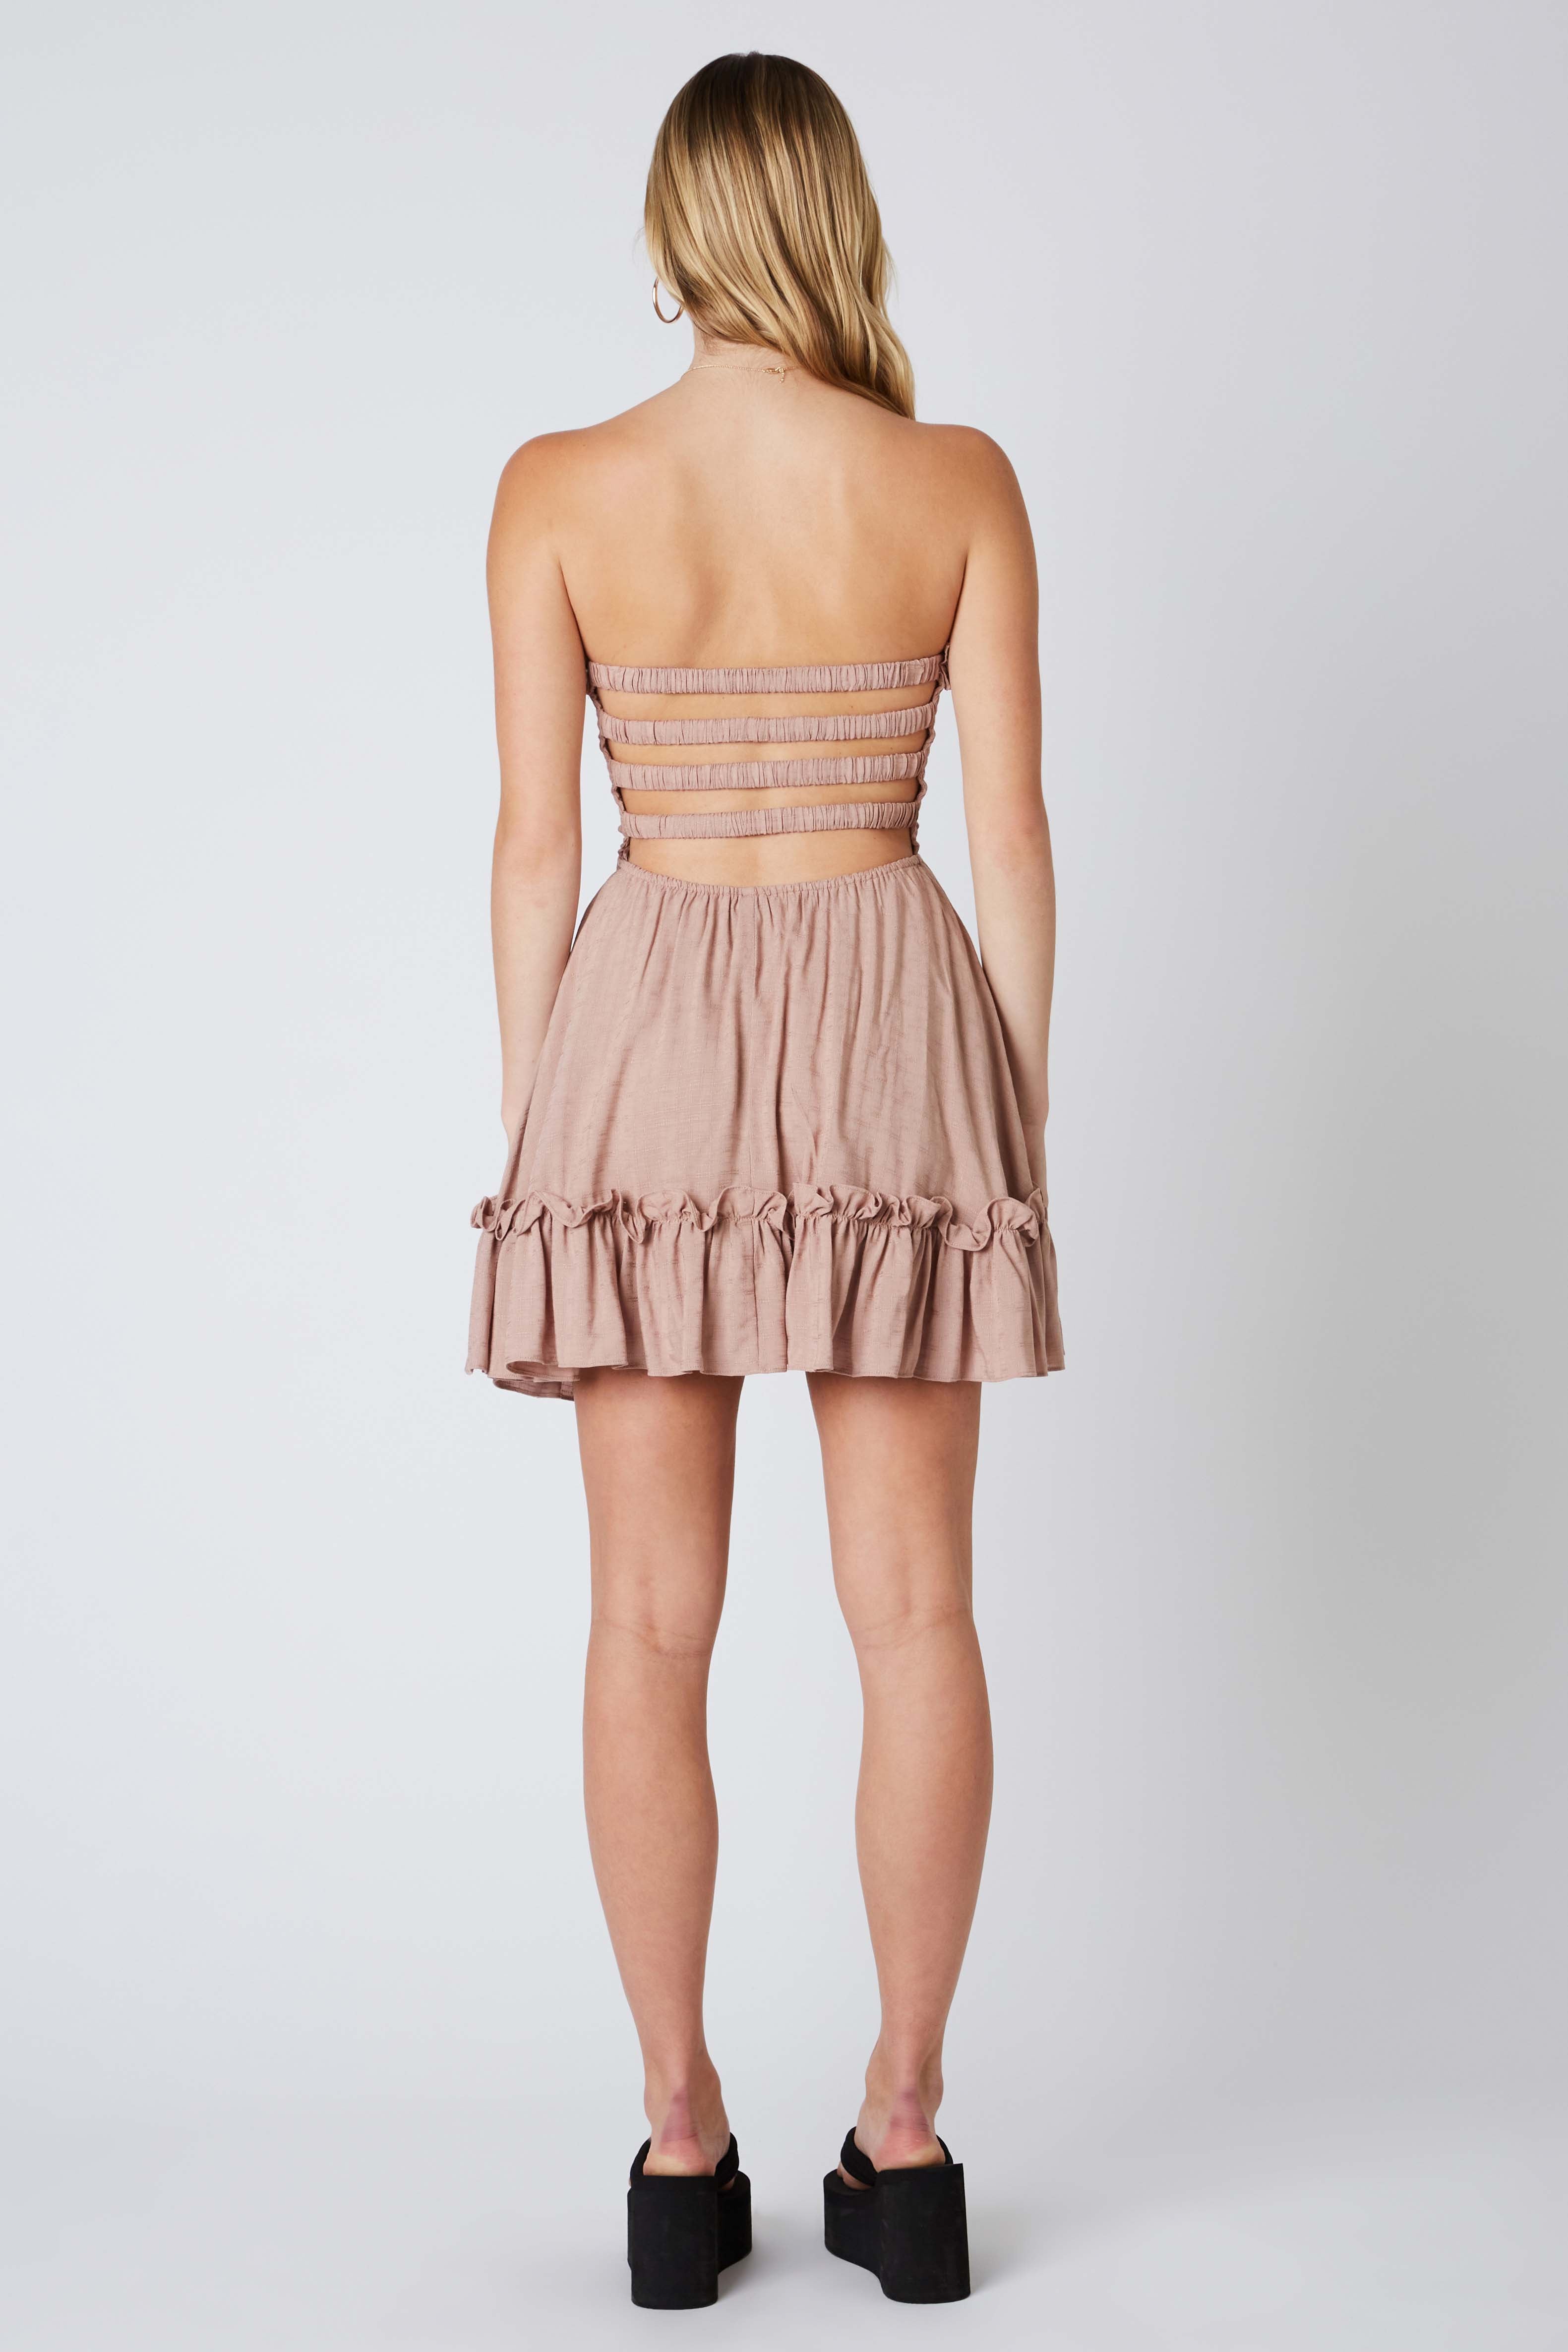 Smocked Strapless Dress in Toast Back View